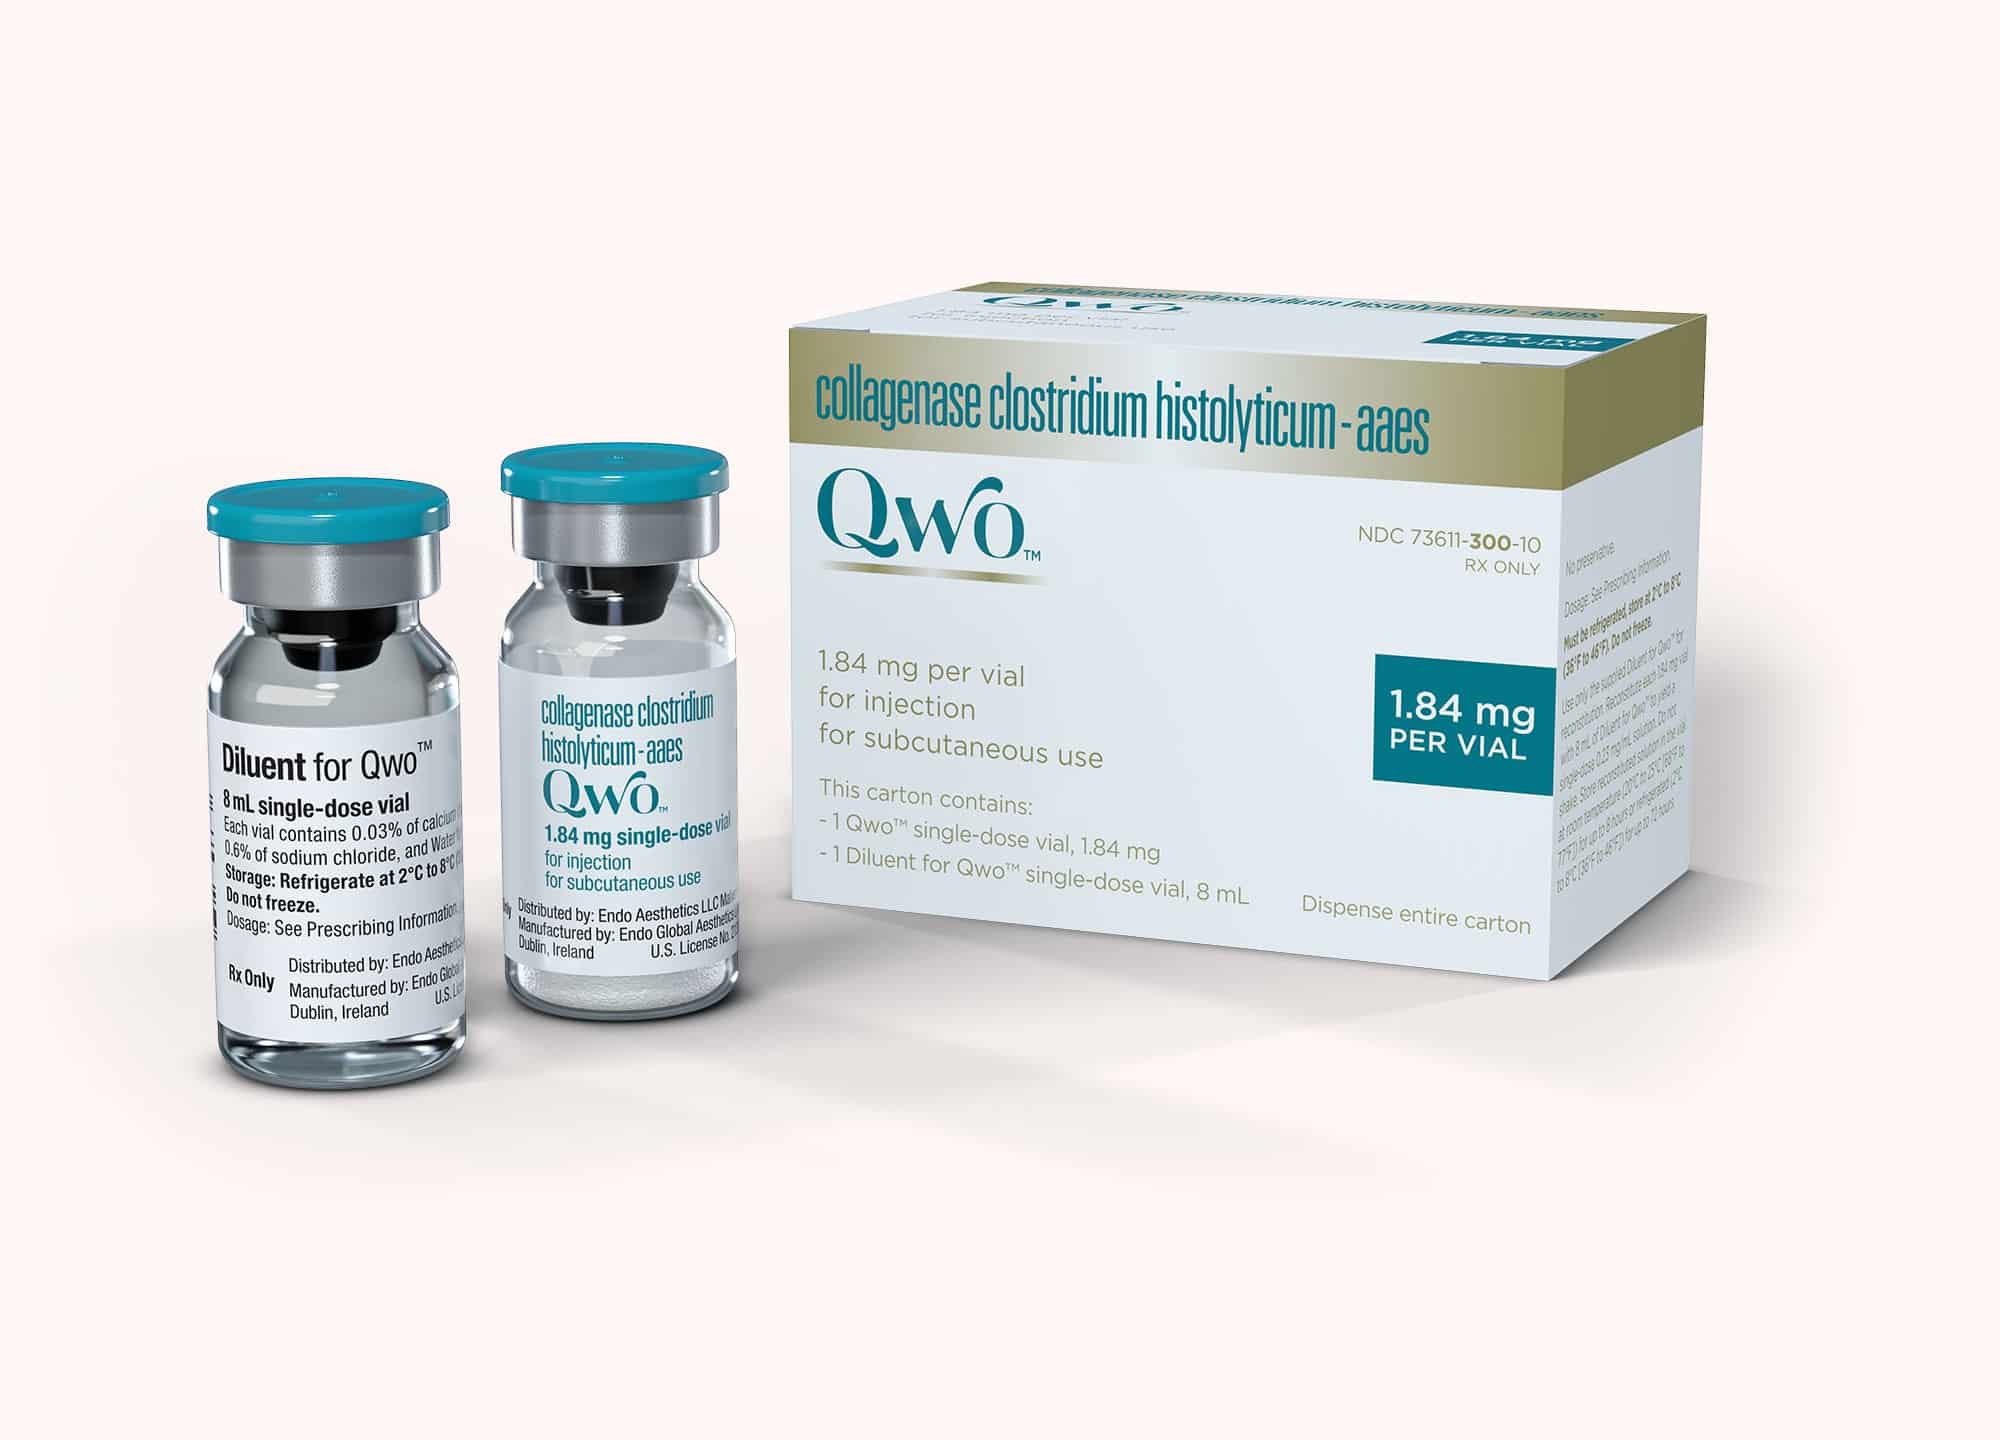 Qwo, a new injectable for cellulite, has officially won FDA approval for the treatment of moderate to severe cellulite in the buttocks of adult women.